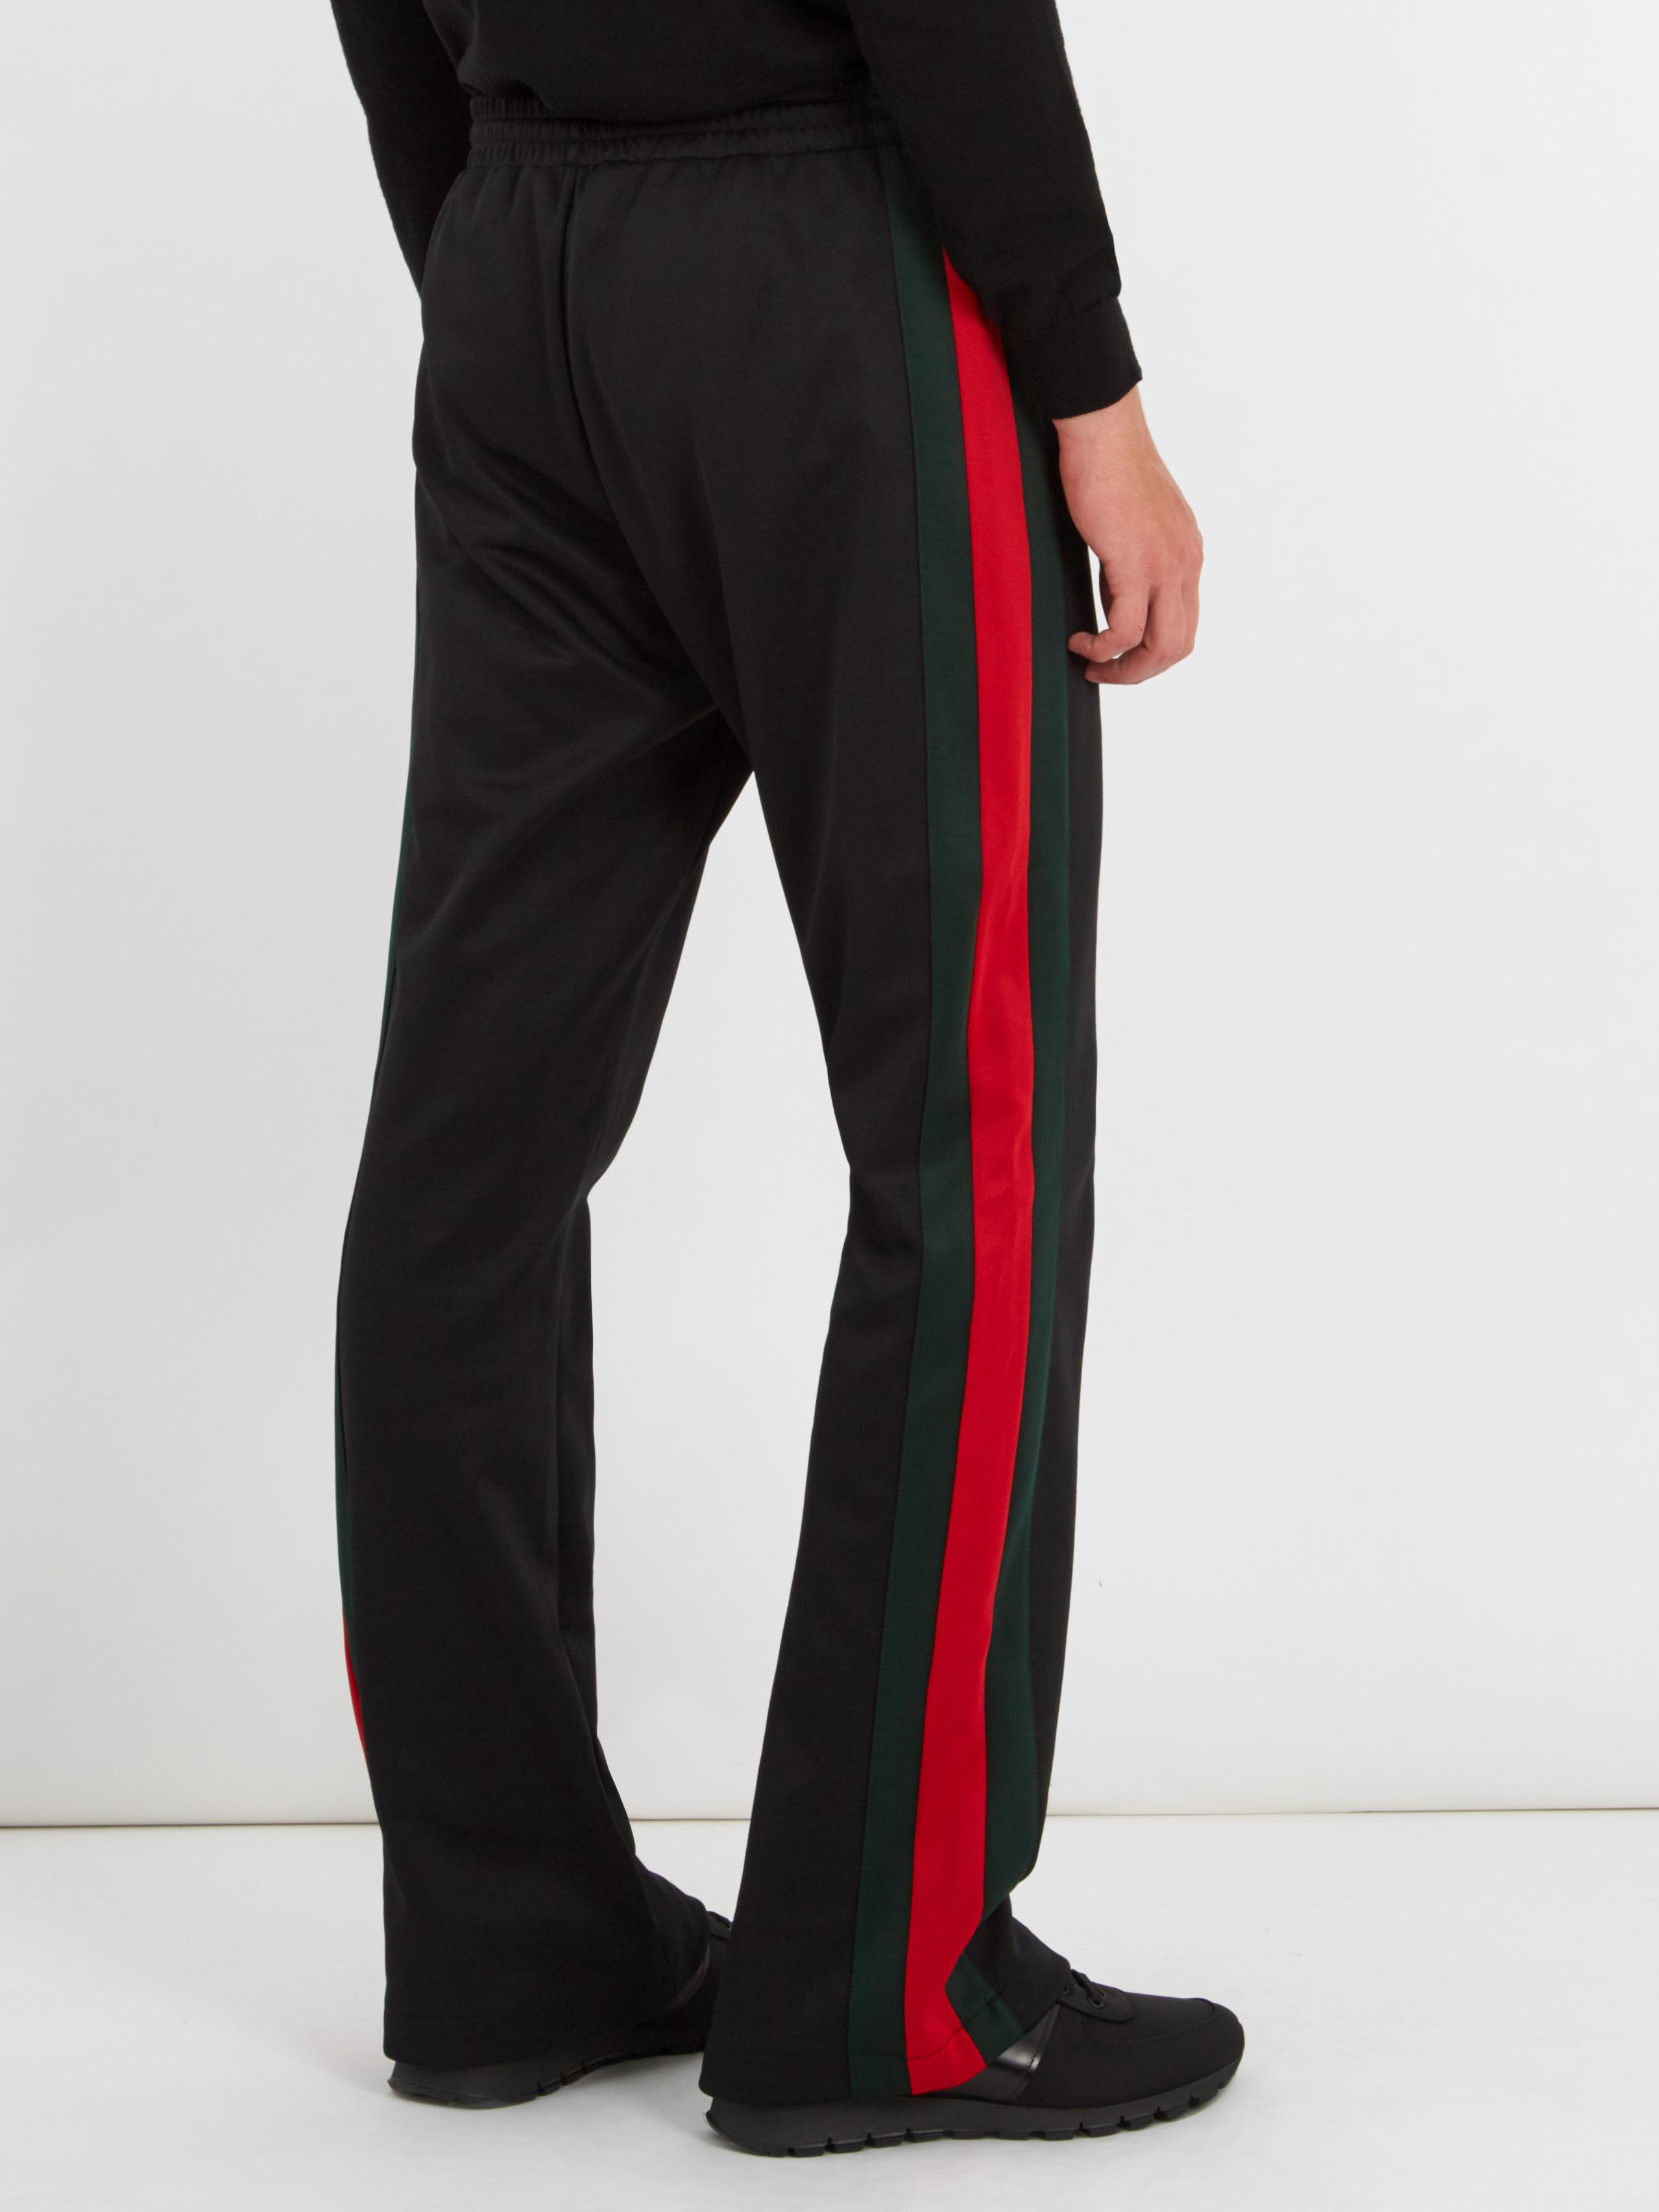 Hane Supersonic hastighed Medicin Gucci Synthetic Web-striped Mid-rise Track Pants in Black for Men - Lyst